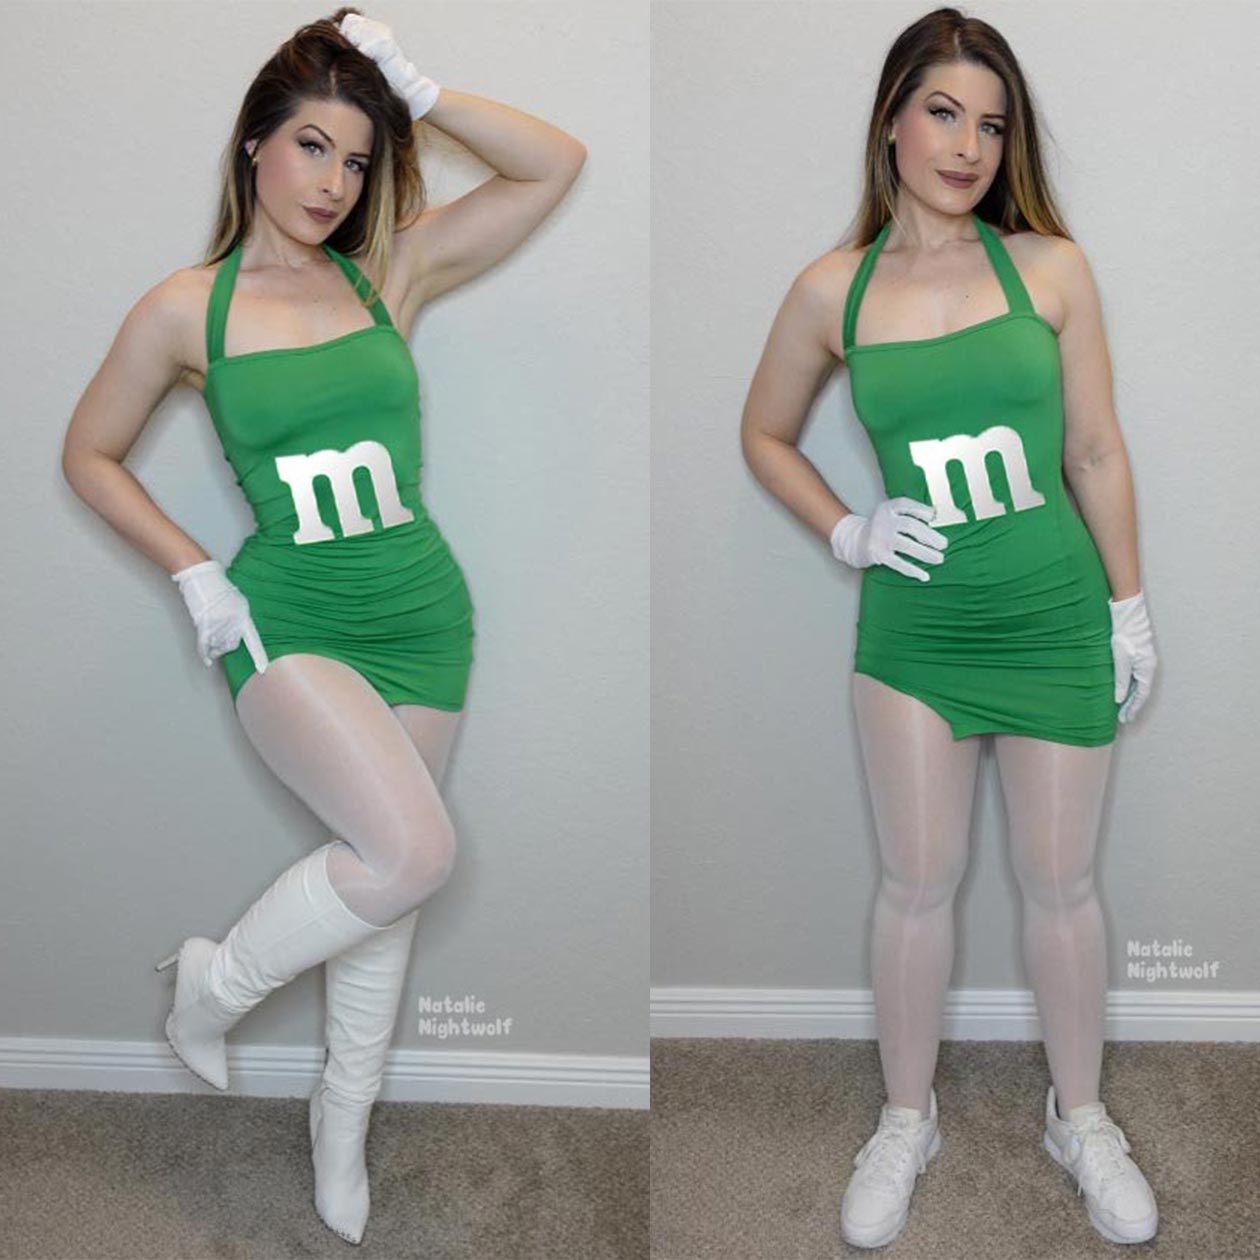 Natalie Nightwolf As The Green M 